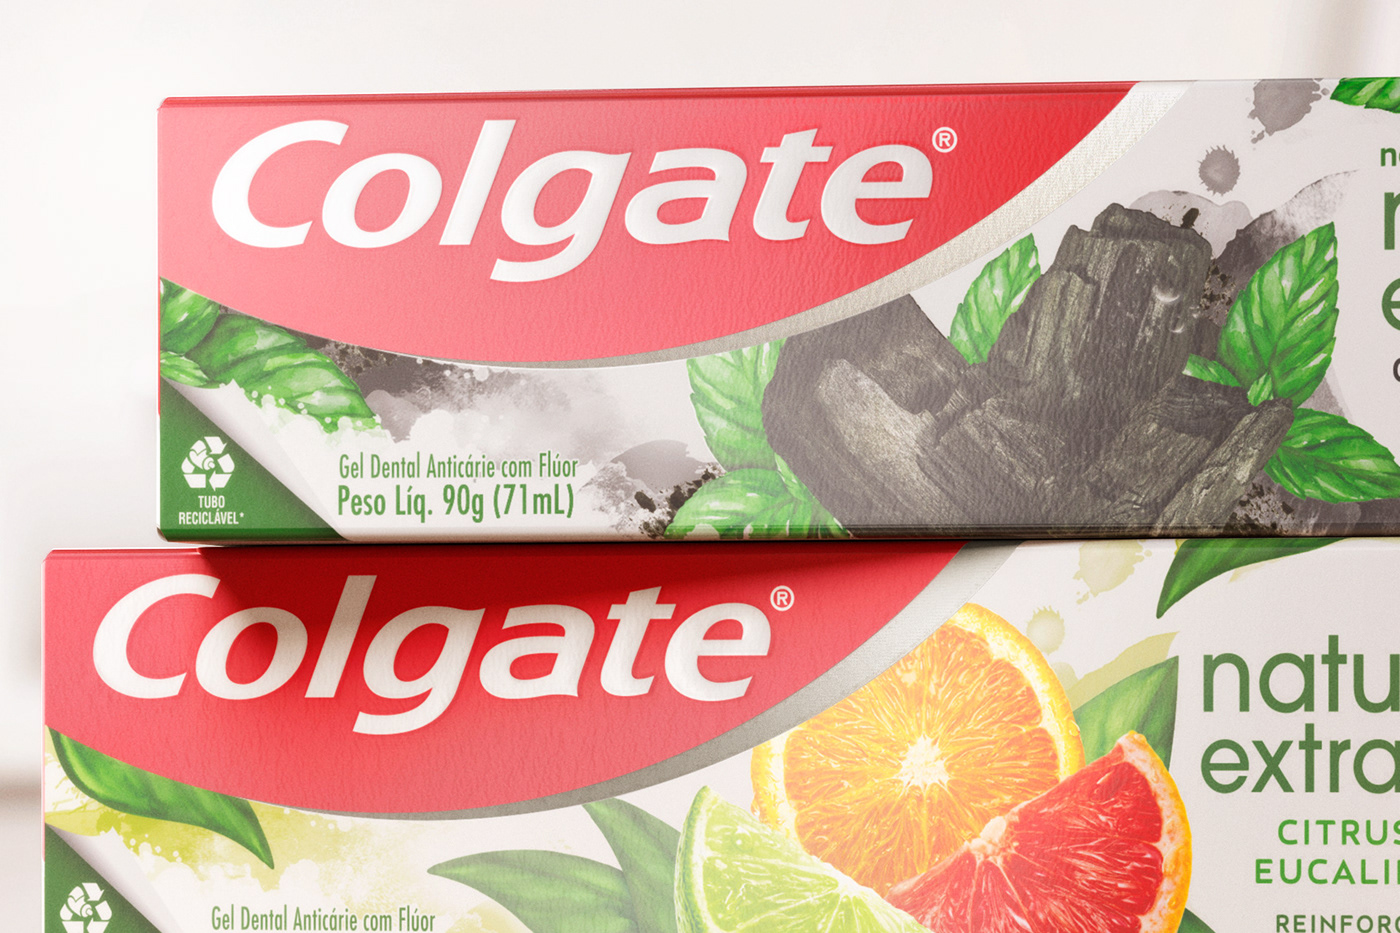 charcoal citrus Coconut colgate flower Mouthwash natural natural extracts toothpaste water